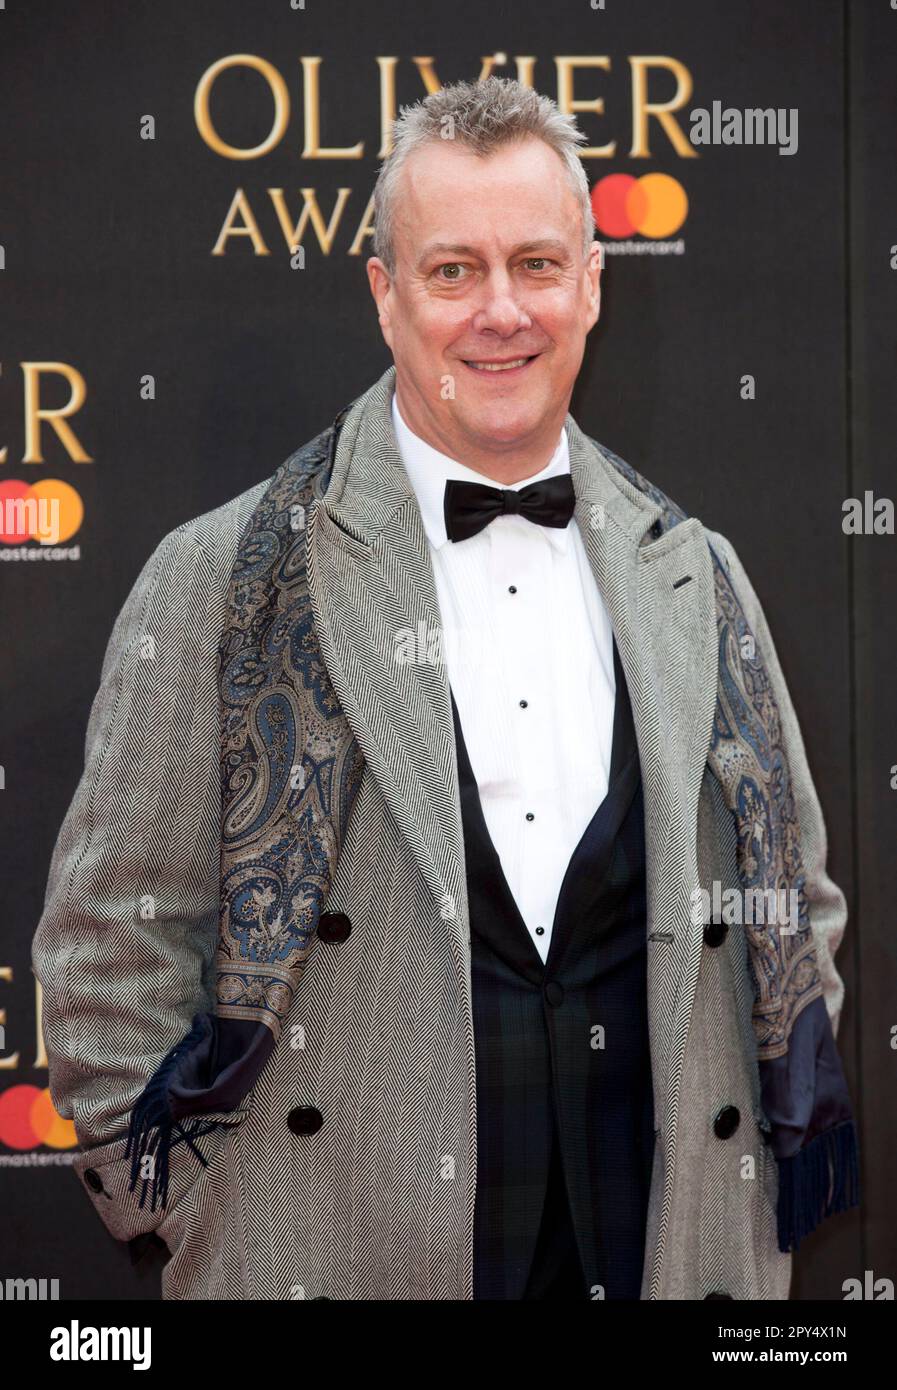 File photo dated 08/04/2018 of Stephen Tompkinson who is due to go on trial accused of inflicting grievous bodily harm. The 57-year-old, best known for playing the title role in TV crime drama DCI Banks, will appear at Newcastle Crown Court on Wednesday. At a previous hearing, the clerk of the court said Tompkinson 'unlawfully and maliciously inflicted grievous bodily harm' on a man named Karl Poole on May 30 2021. The actor, who lives in Whitley Bay, North Tyneside, denies the charge. Issue date: Wednesday May 3, 2023. Stock Photo